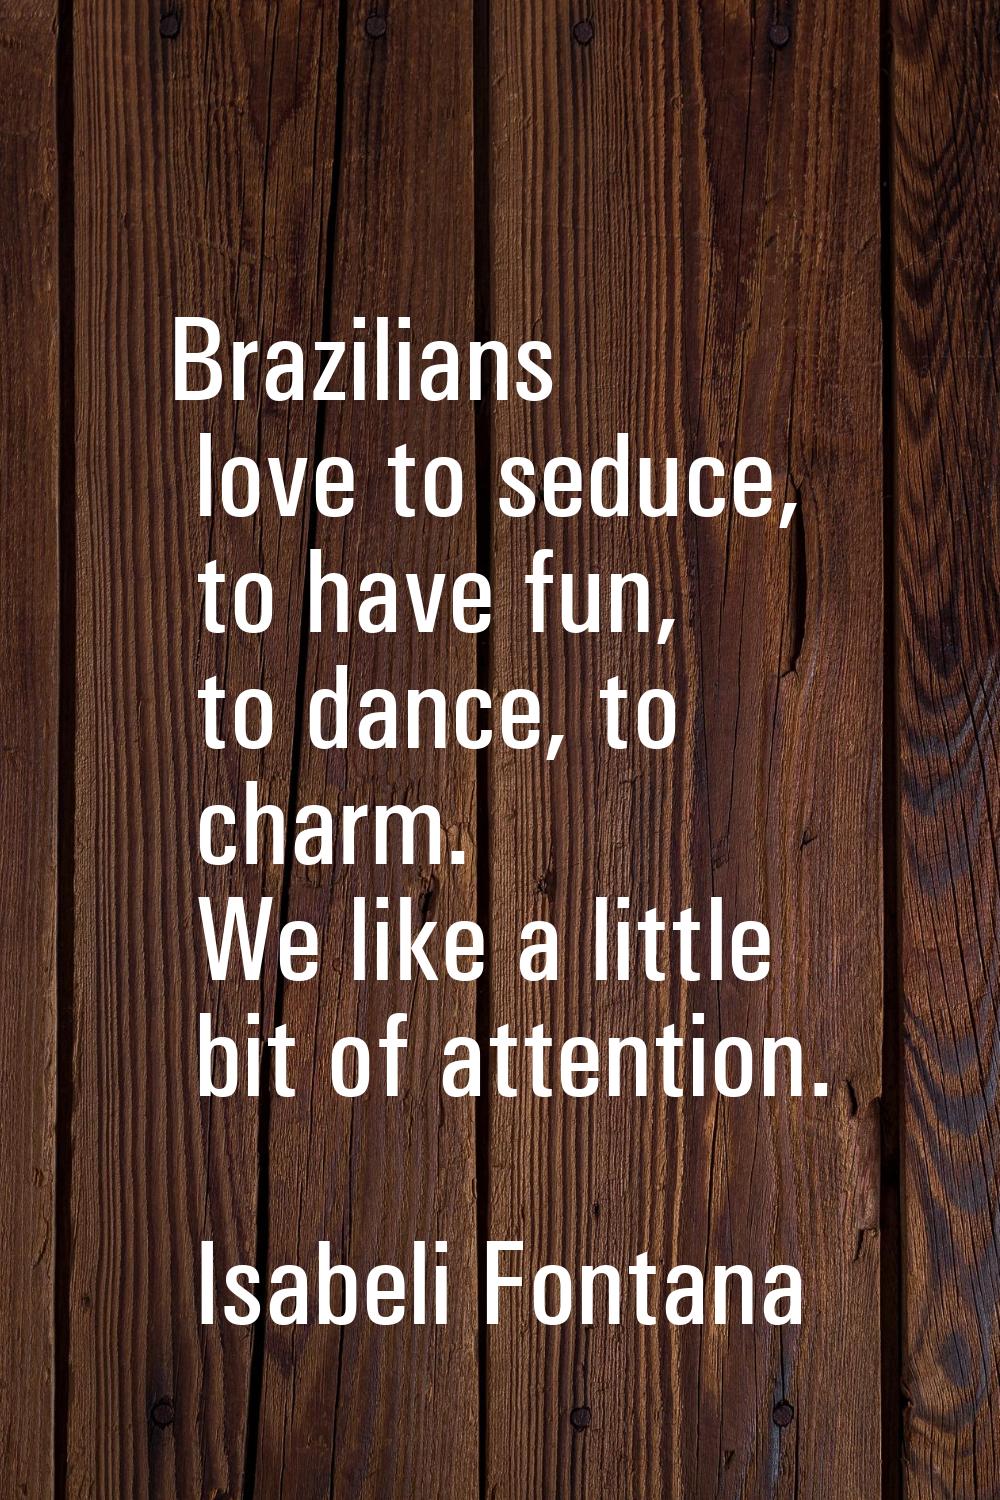 Brazilians love to seduce, to have fun, to dance, to charm. We like a little bit of attention.